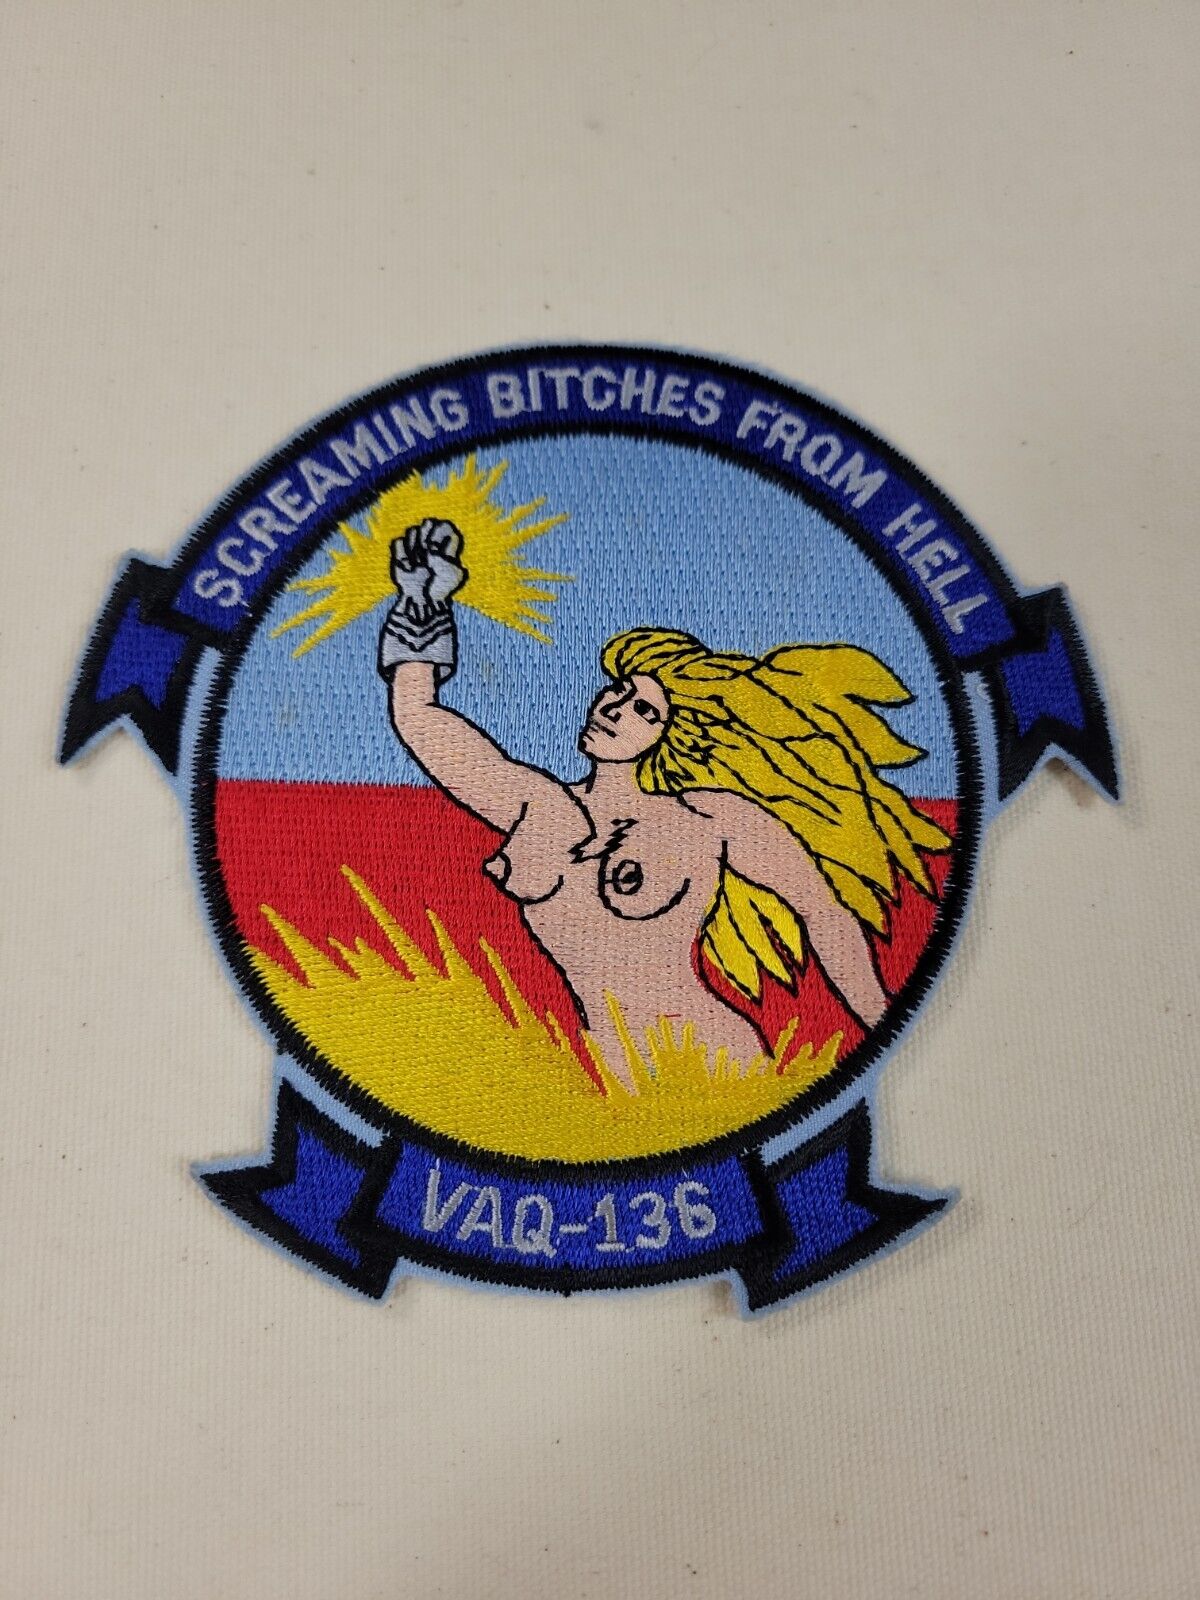 Vintage Patch - Screaming Bitches From Hell VAQ-136